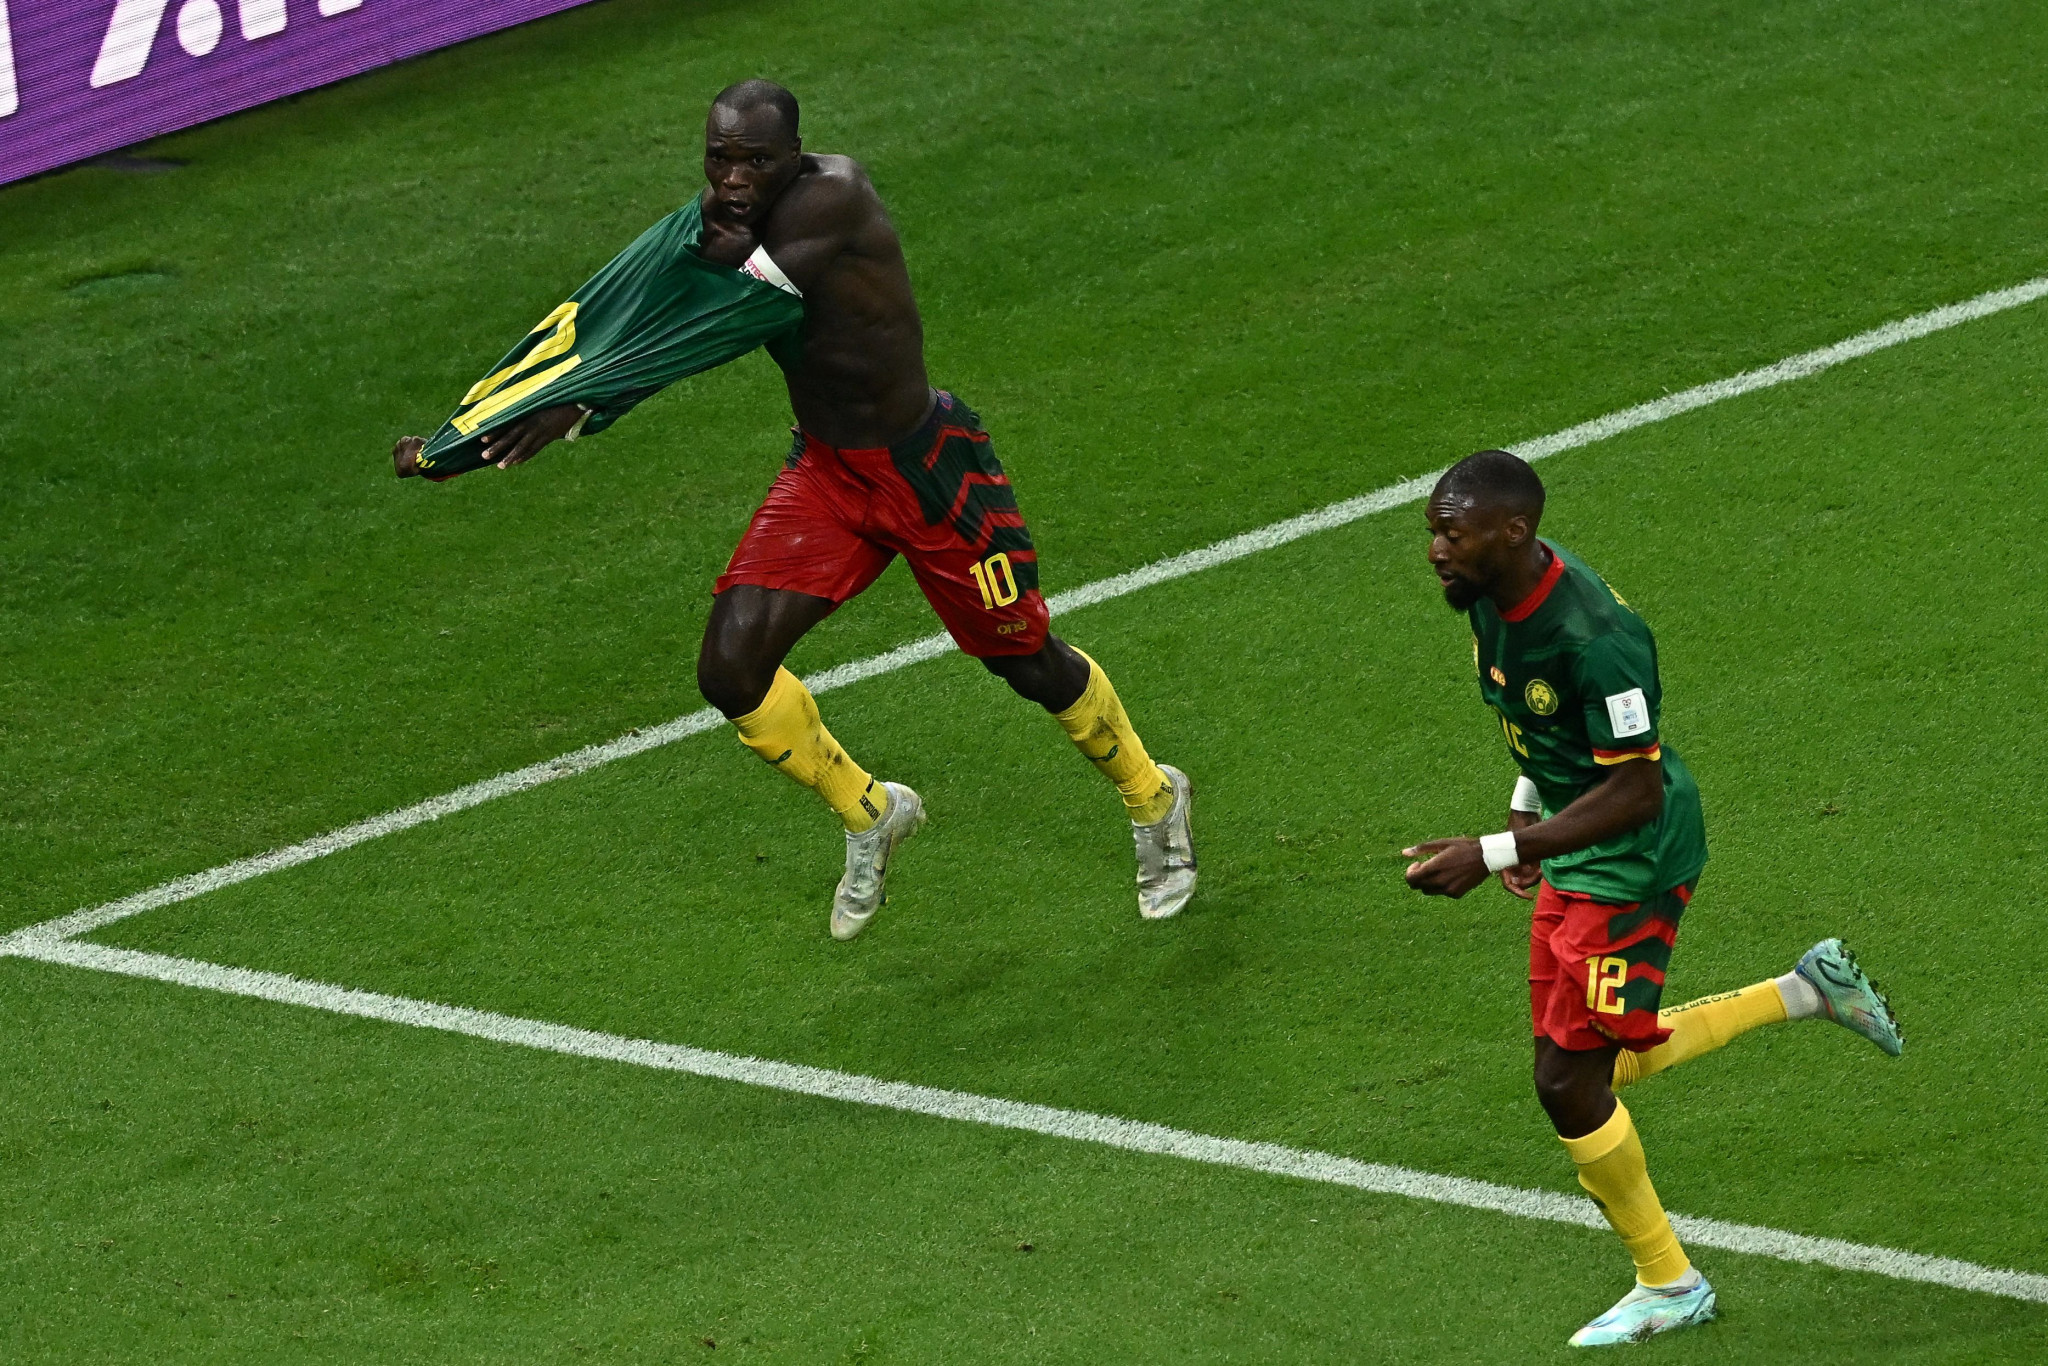 Vincent Aboubakar celebrating scoring a last-minute goal to help Cameroon defeat Brazil 1-0 ©Getty Images